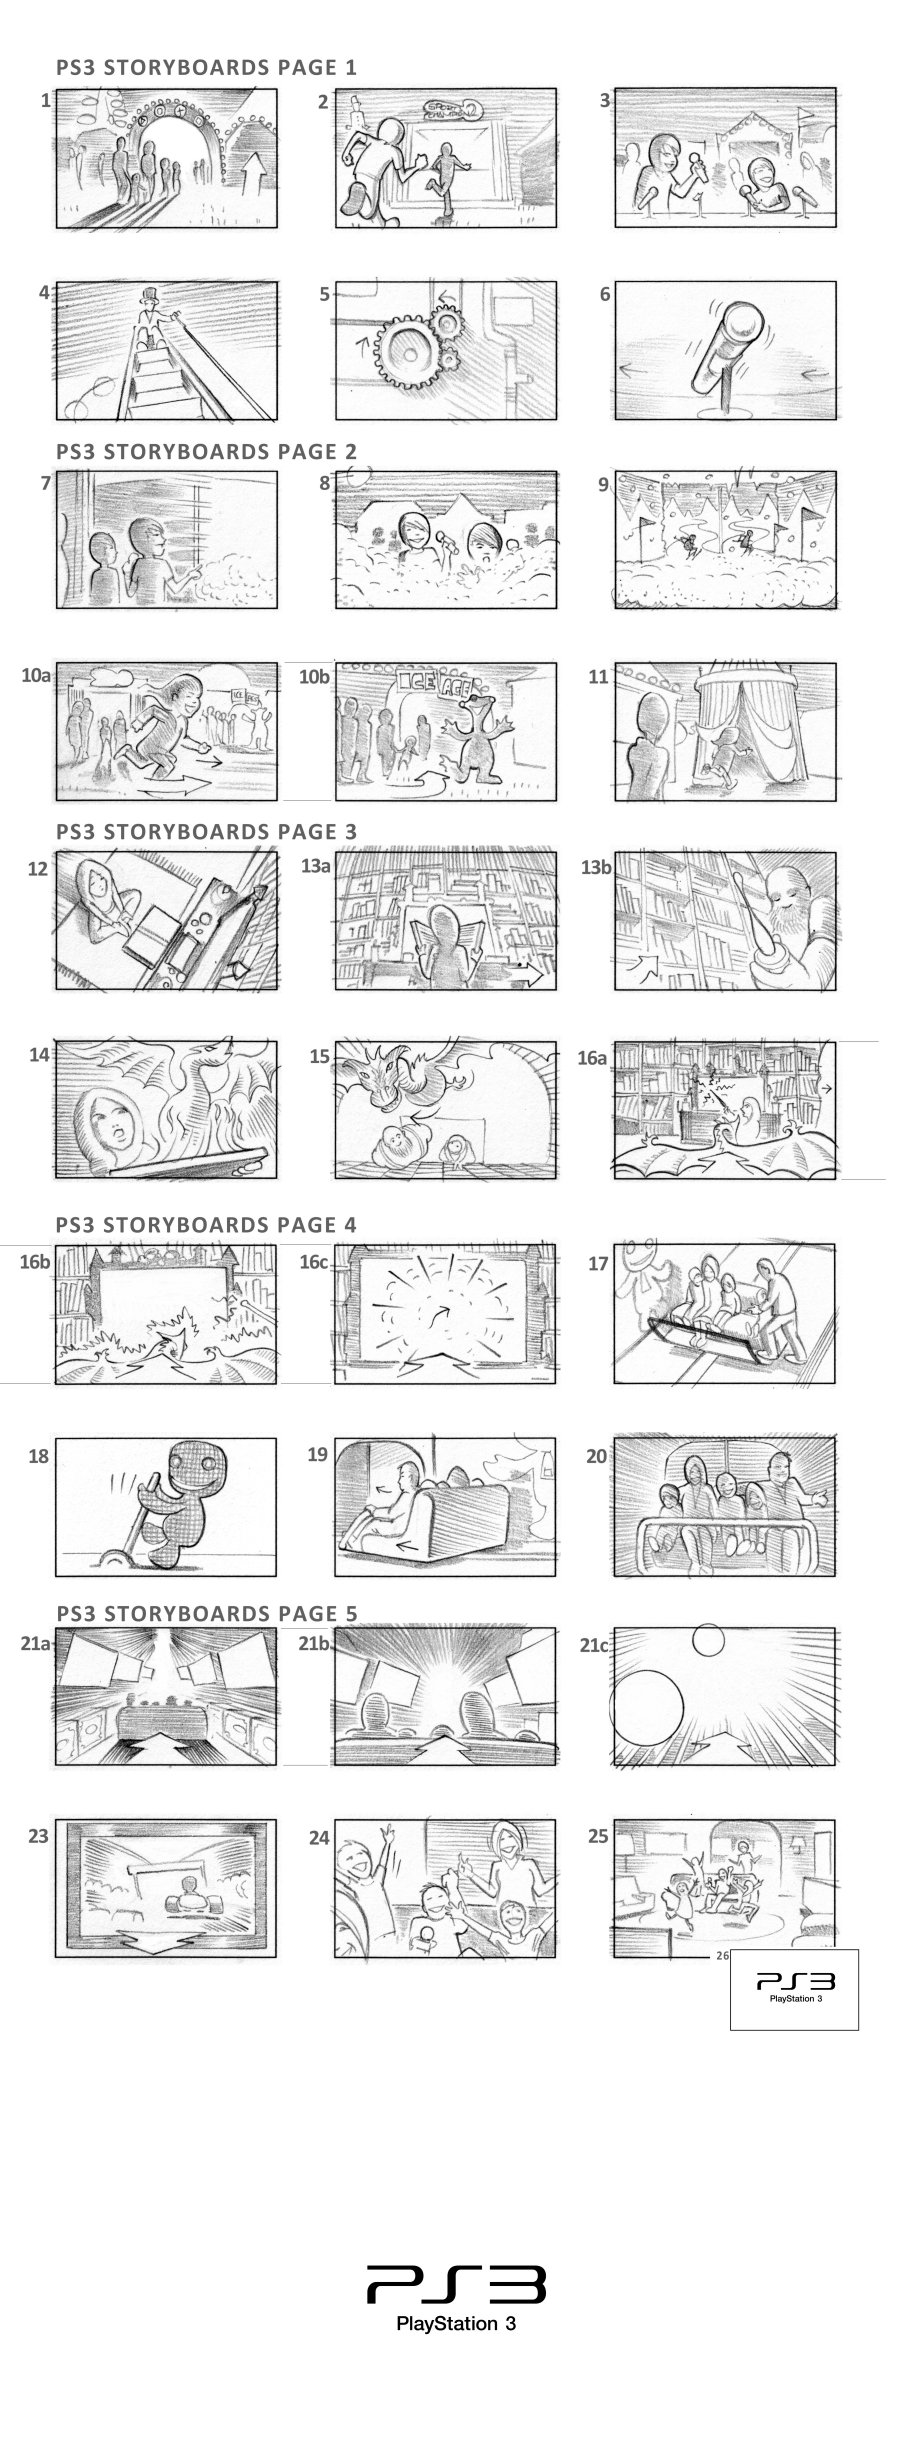 SONY PS3 STORYBOARD BY ANDY SPARROW